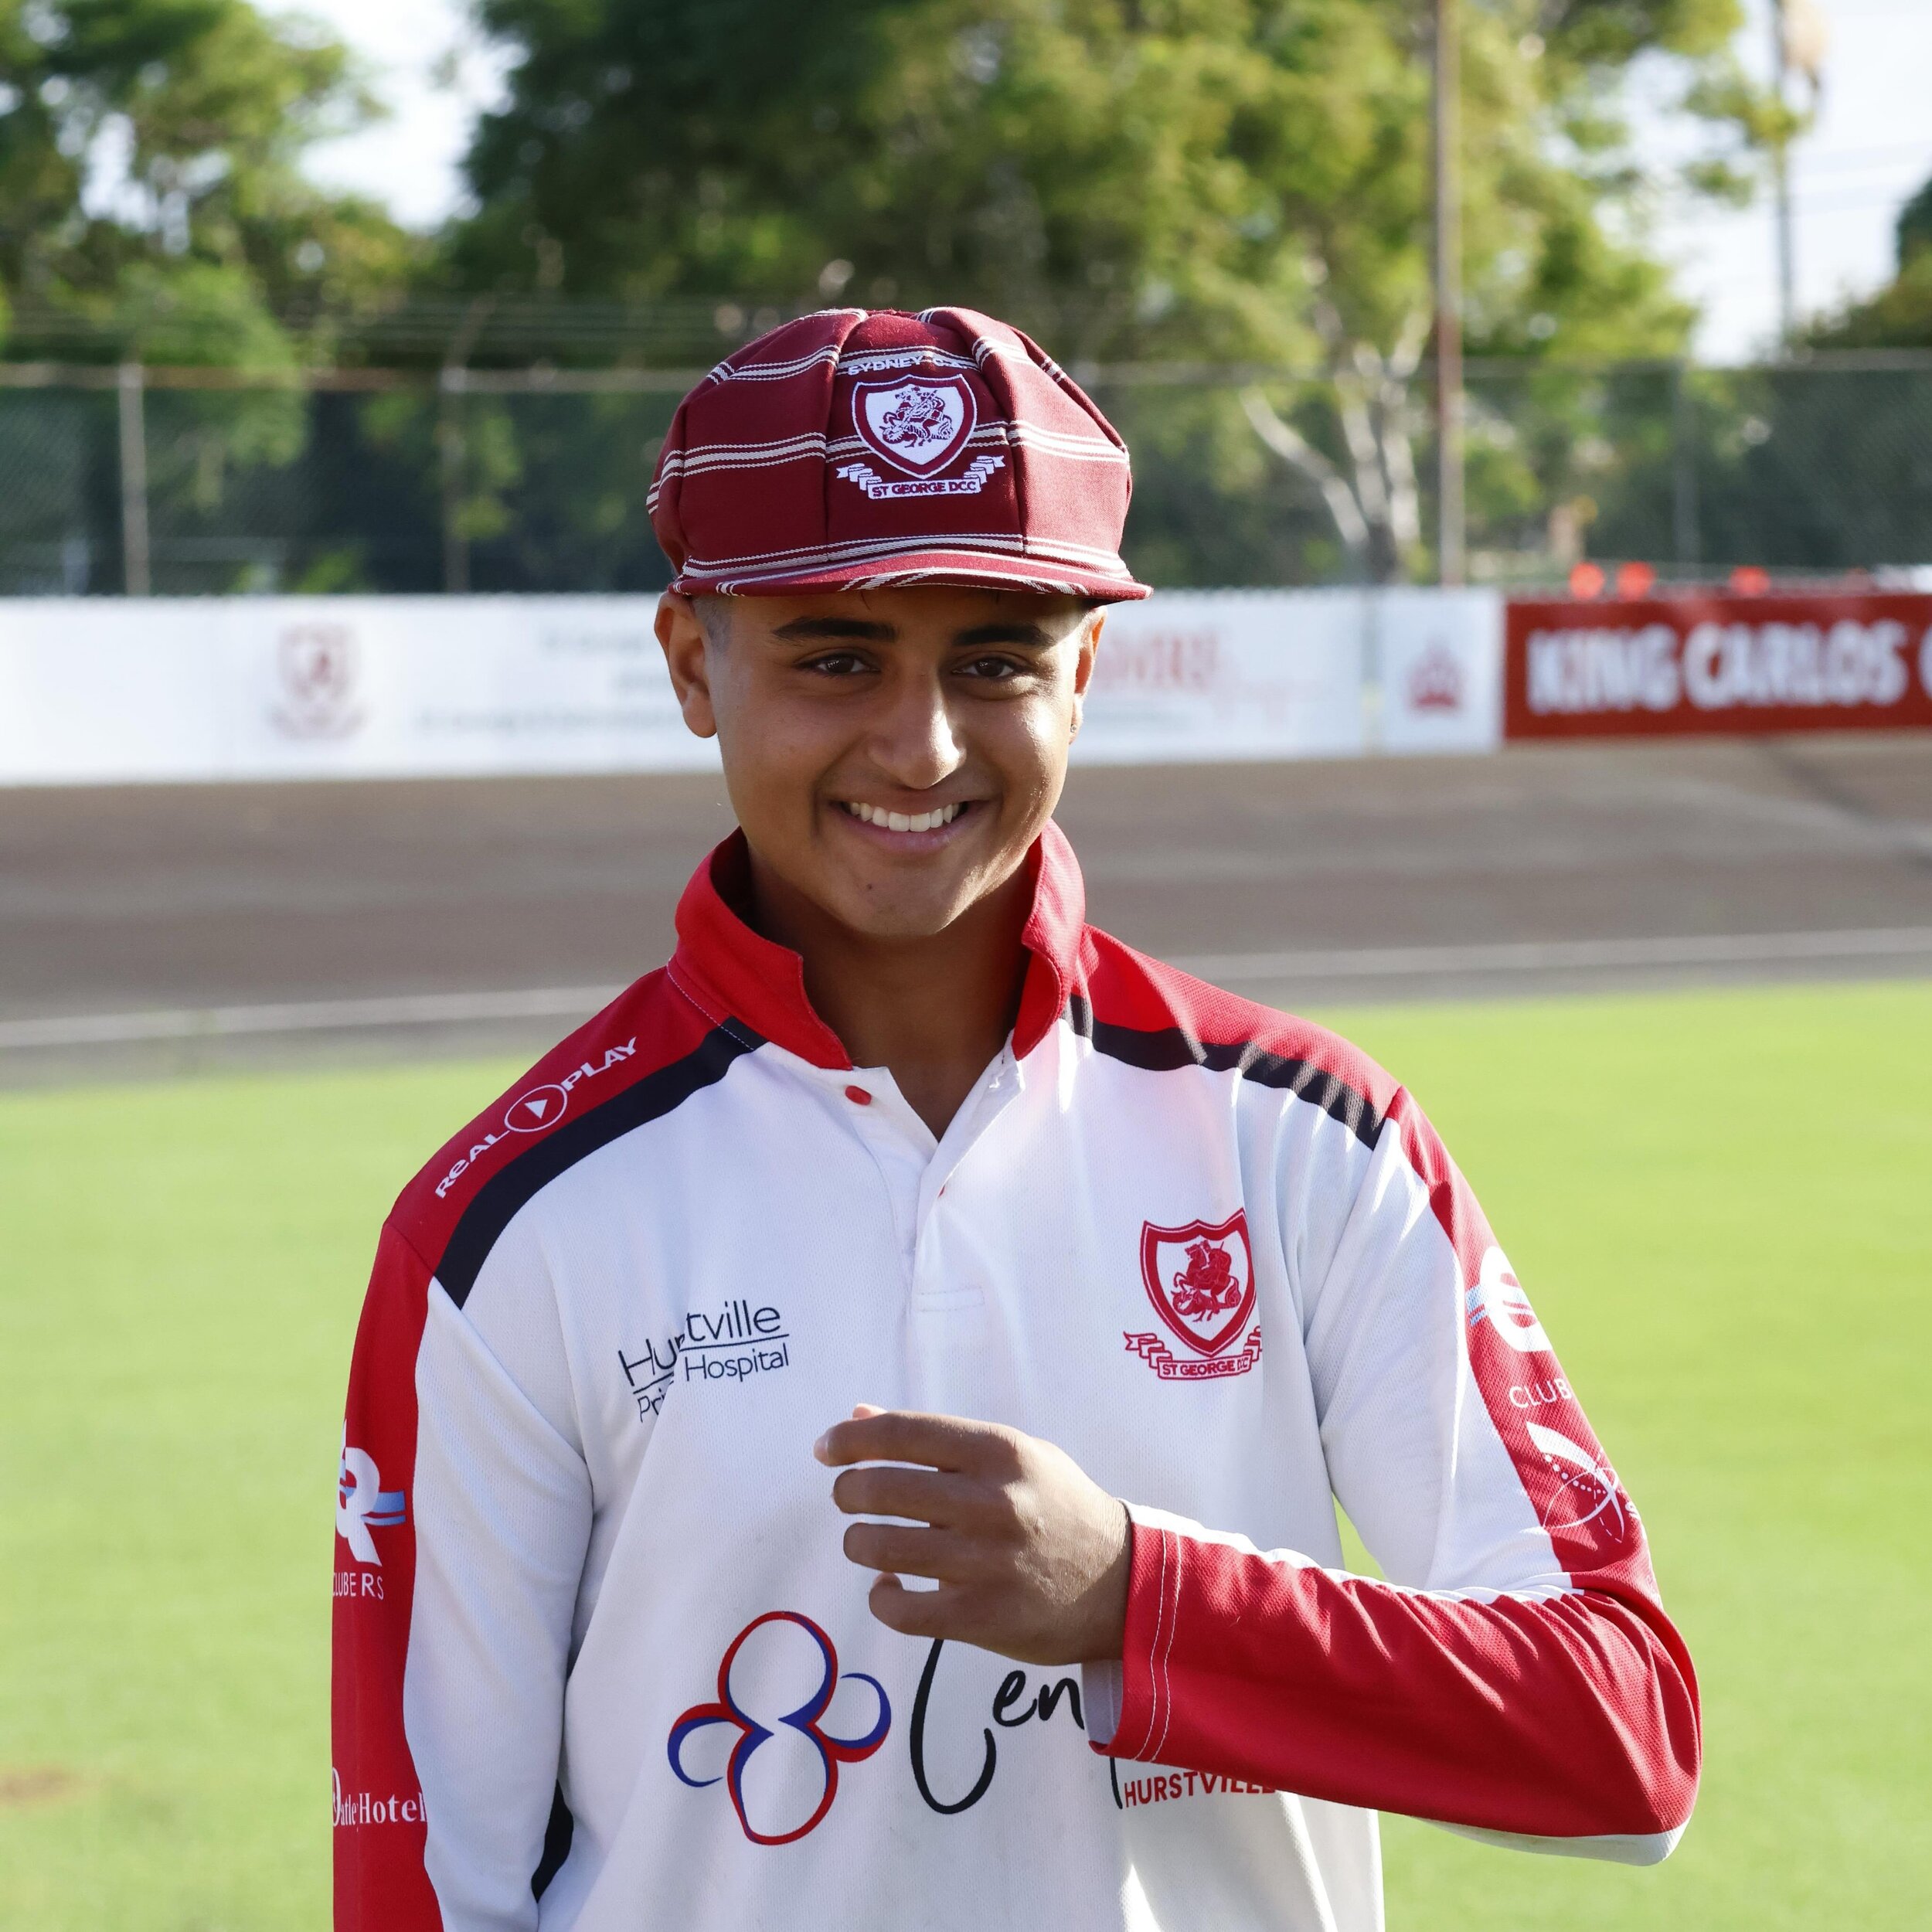 PLAYER OF THE YEAR - VANSH JANI

Our Kerry O&rsquo;Keeffe Medal winner for 2023-24 is @_vanshjani. He scored 956 runs at 56 and also took 8 wickets. We are very excited to hear how he&rsquo;s going to go in England. Played Vansh 👏